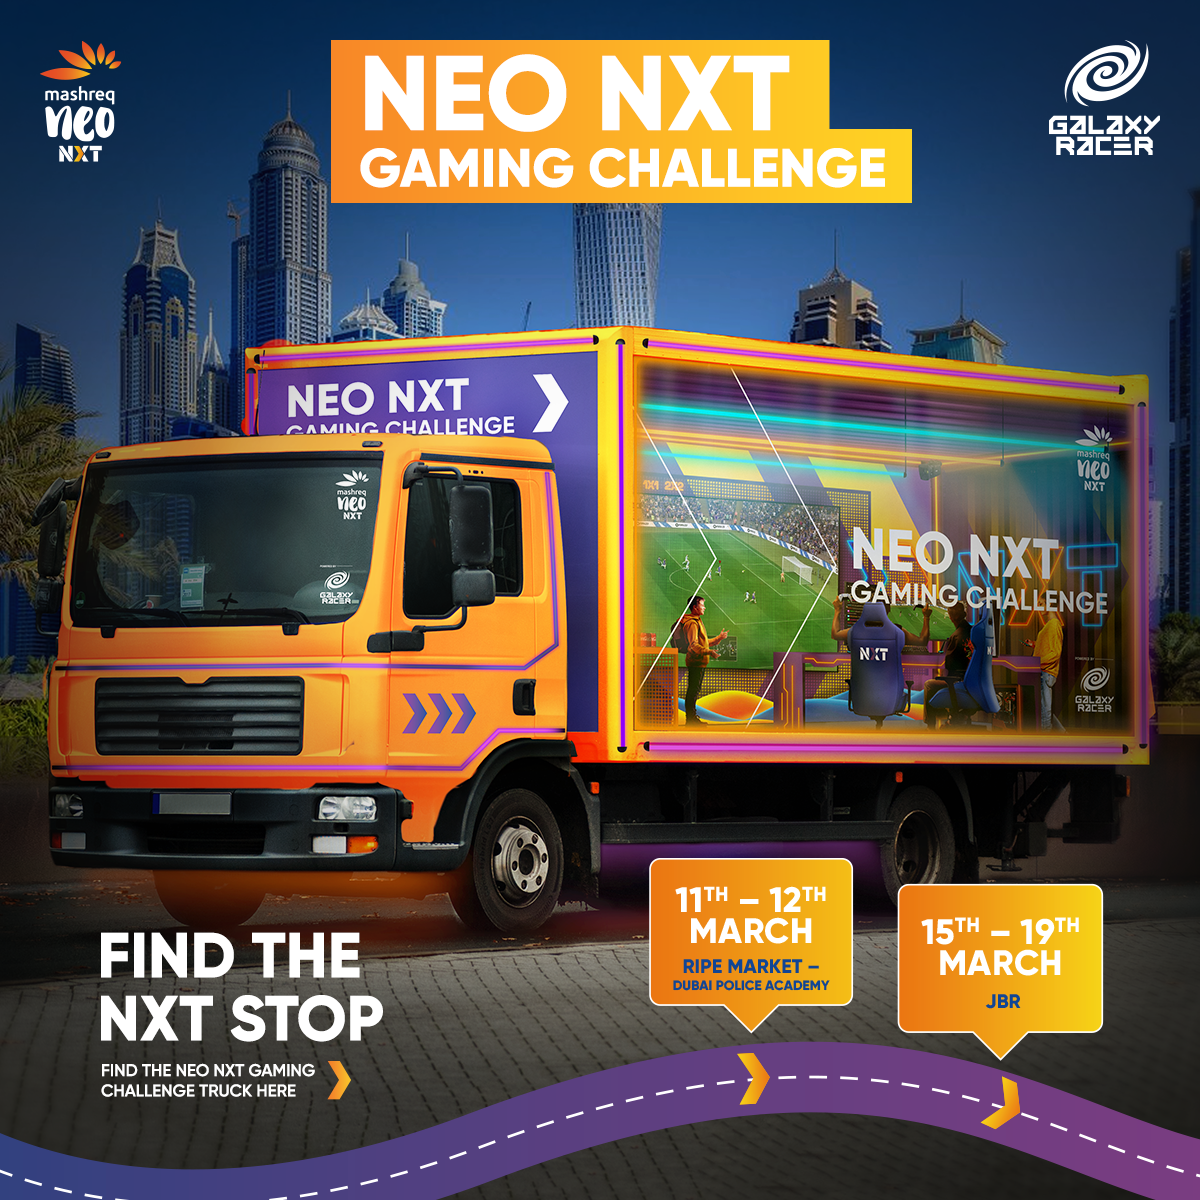 Image for Set To Hit The Road! Galaxy Racer & Mashreq Debut The Mashreq Neo NXT Gaming Challenge